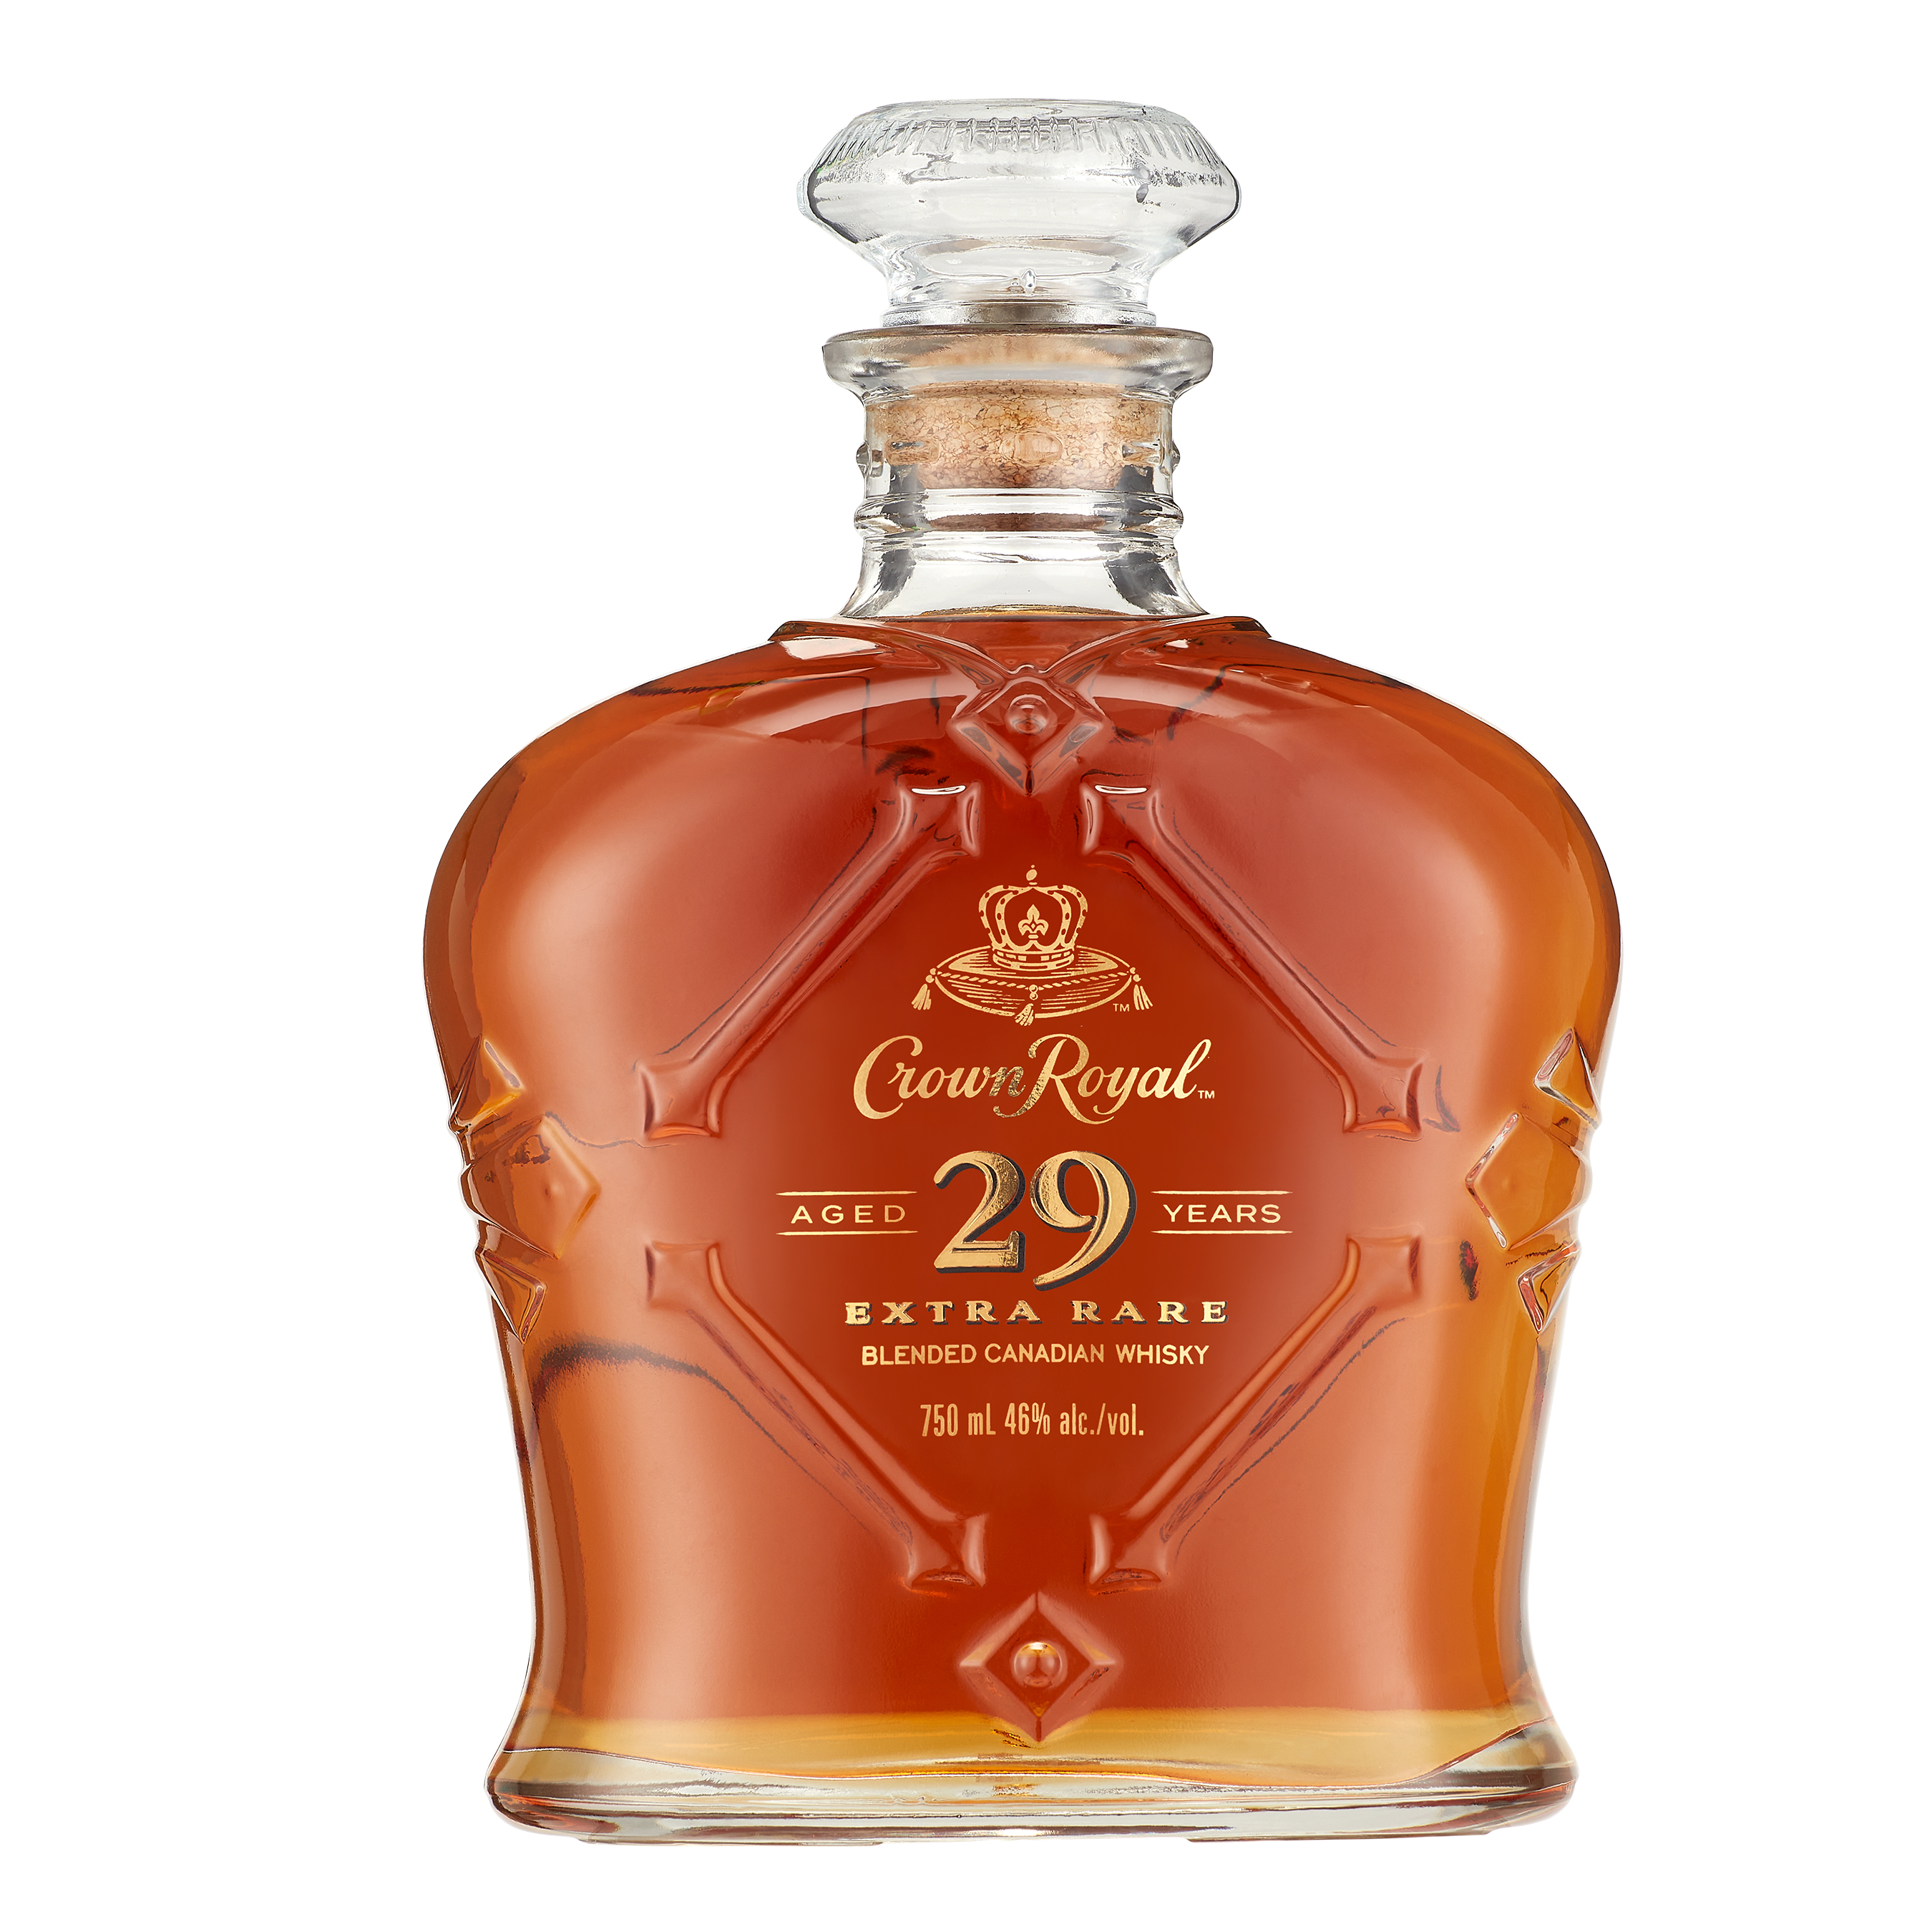 Crown Royal announces oldest aged whisky to date with Crown Royal 29 Year Old.